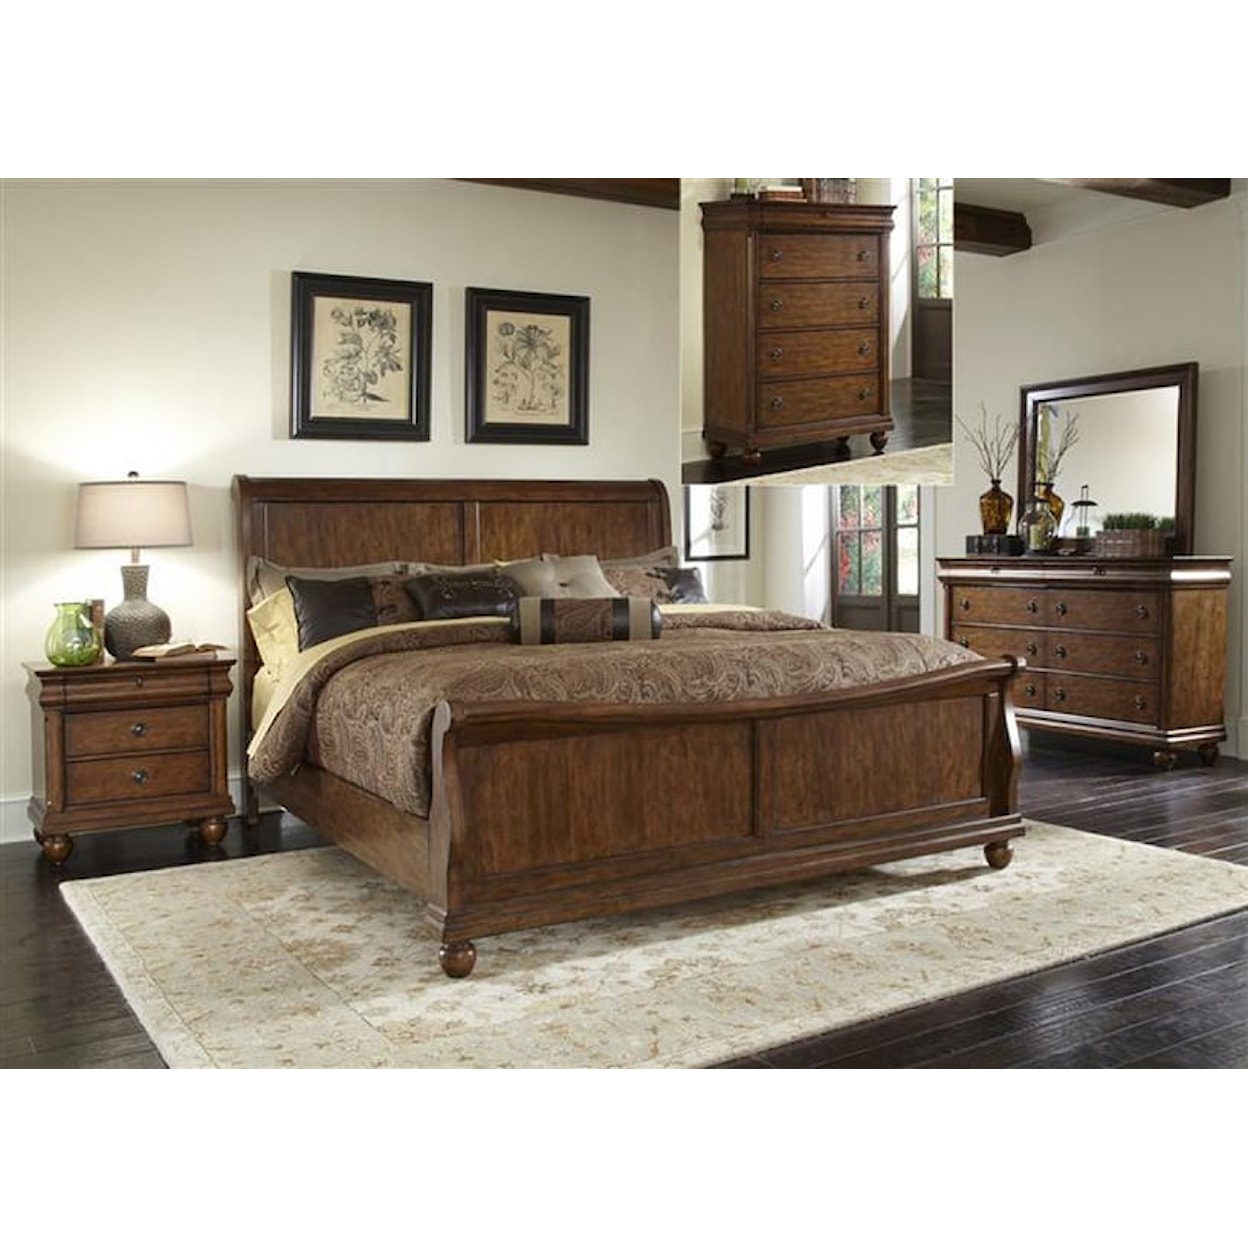 Liberty Furniture Rustic Traditions 589 Queen 7pc Bedroom Group